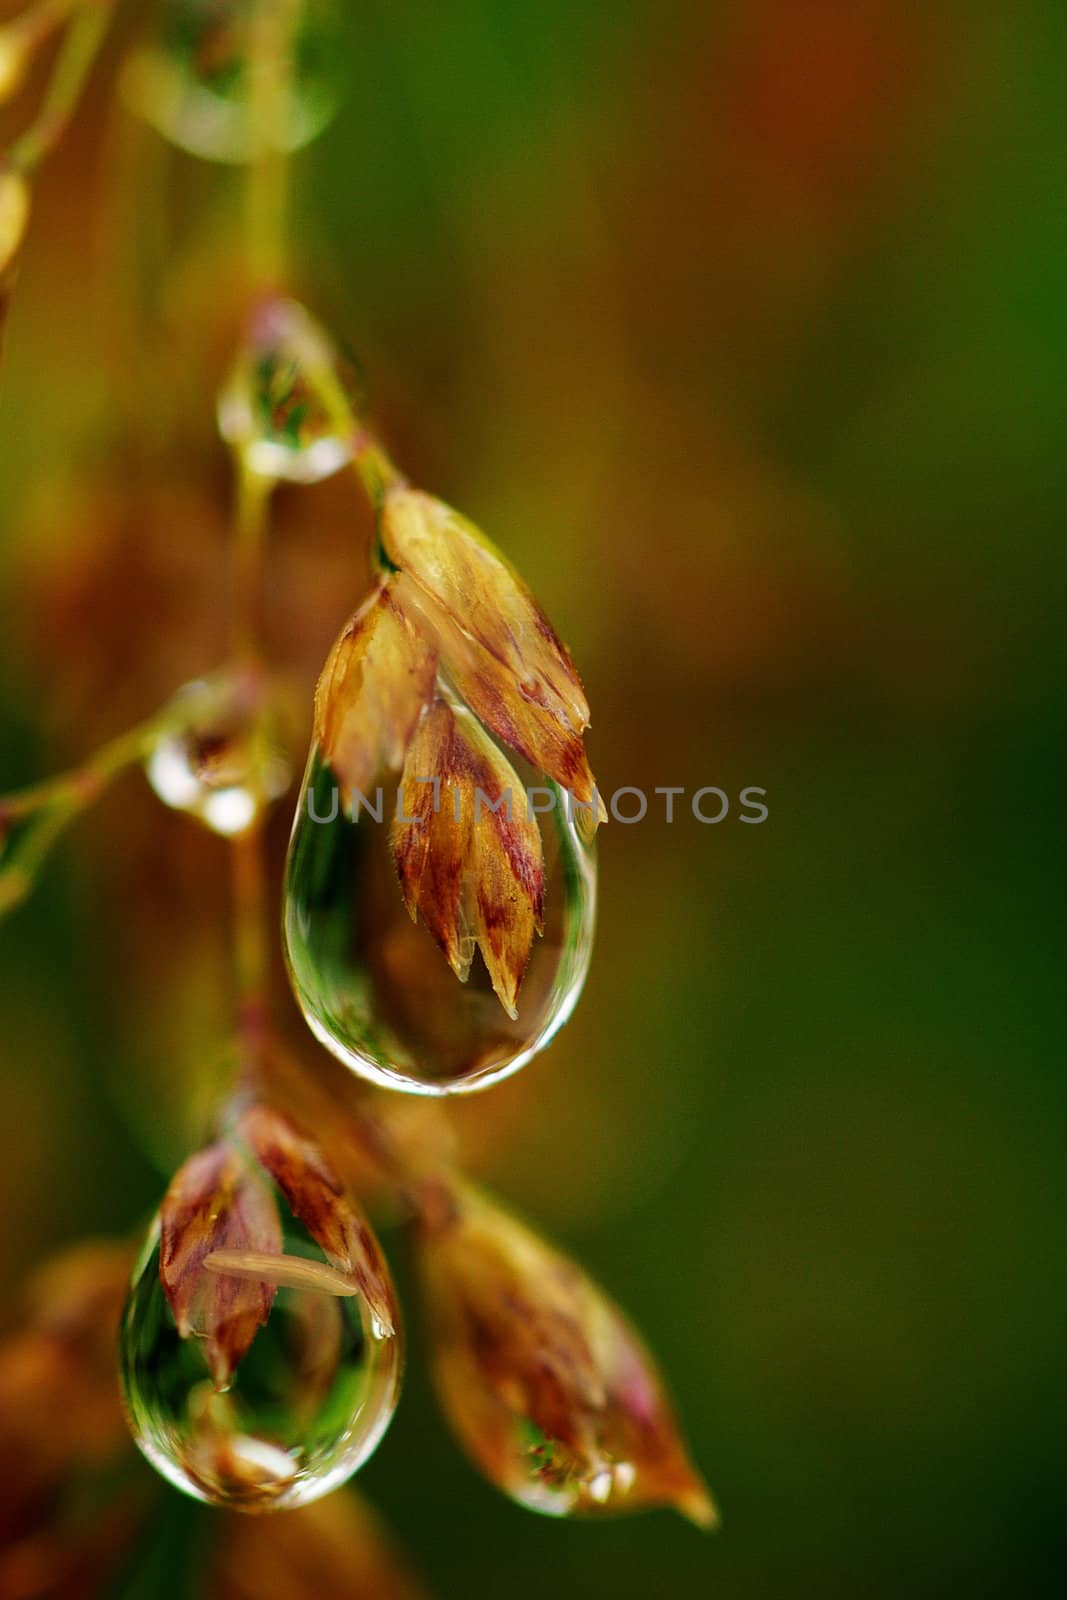 Macro of dew drops holding their own watery worlds.  Dew drops on grain, sharp and liquid, against unfocused background.